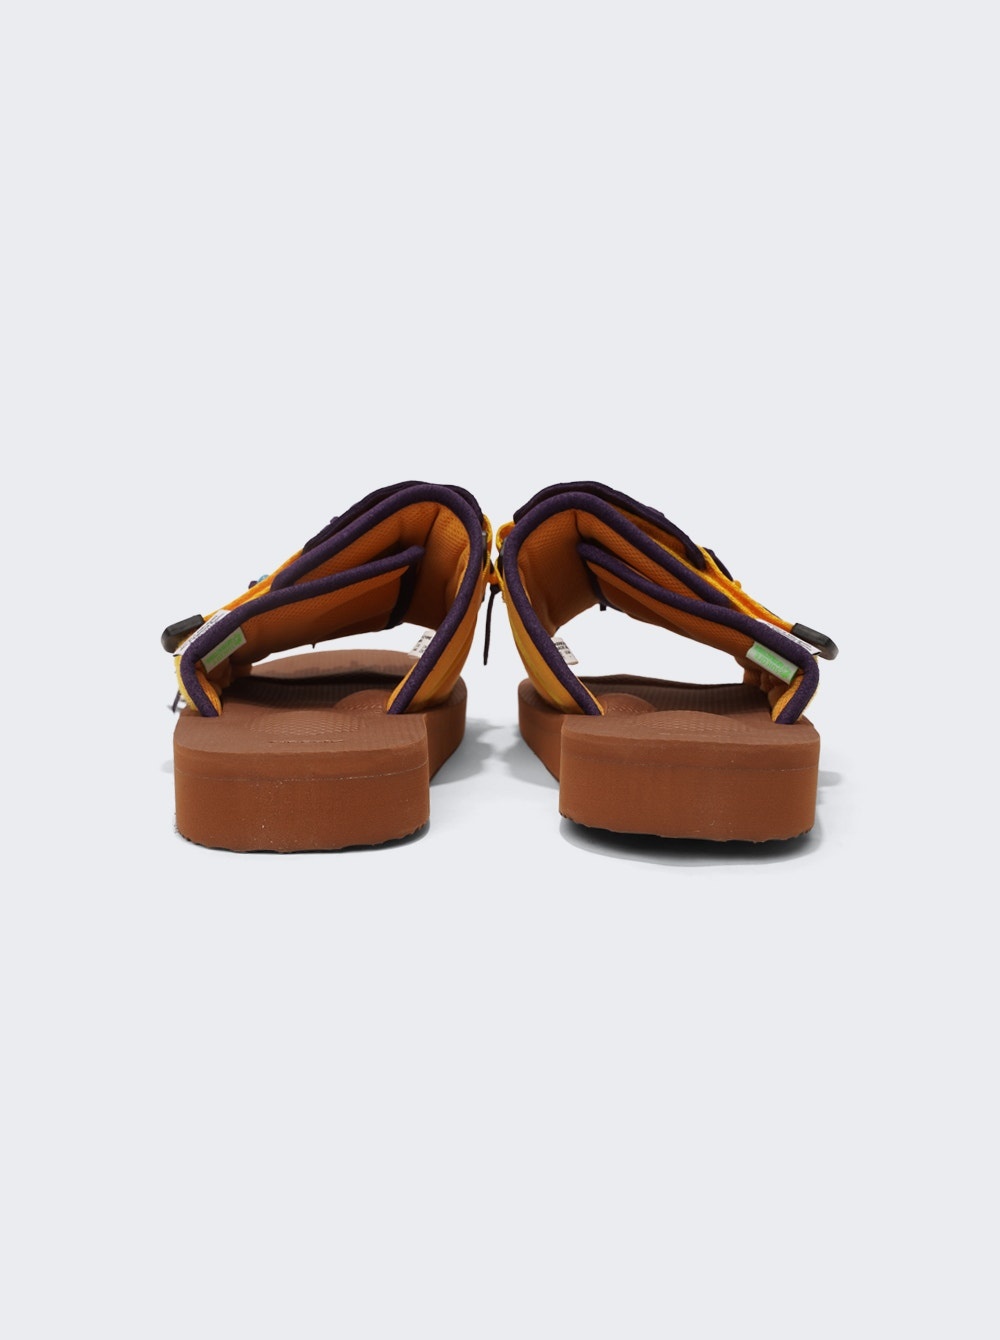 HOTO-Cab Sandals Yellow and Brown